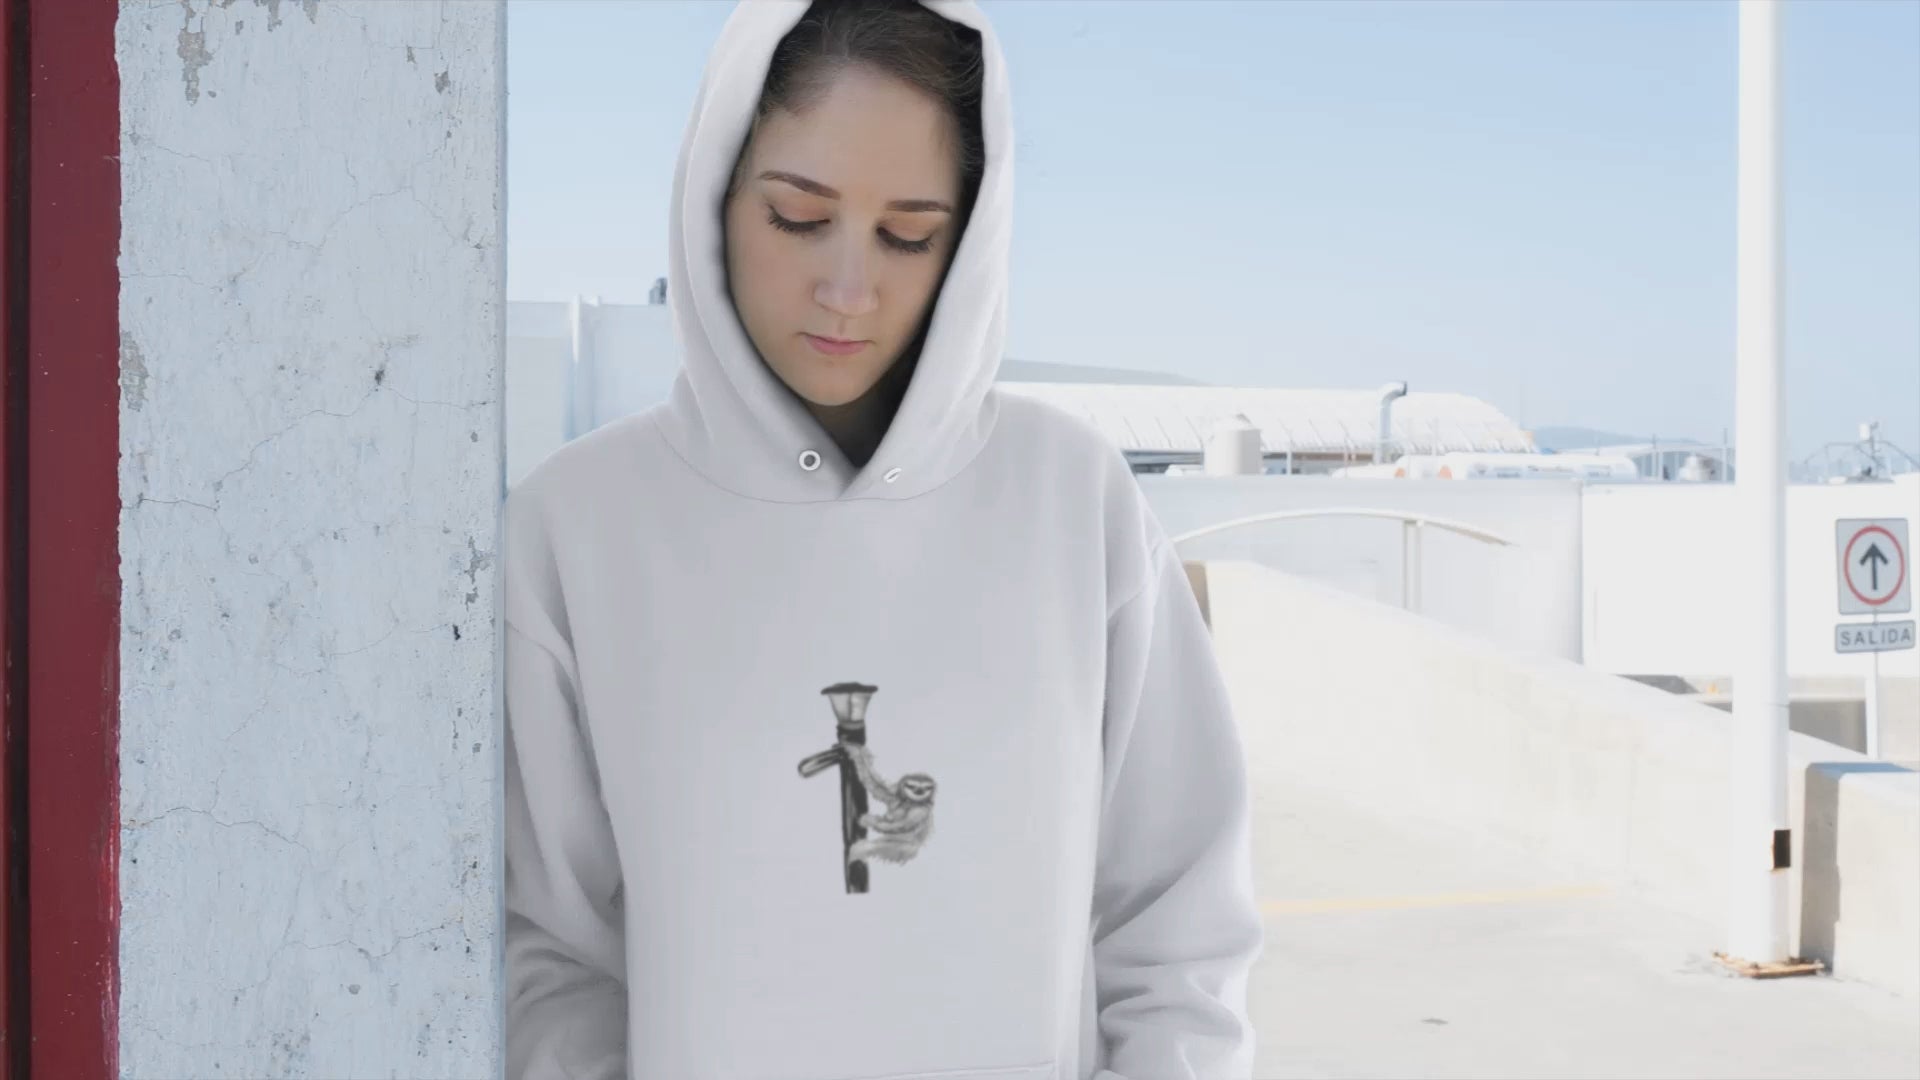 Sloth | Sustainable Hoodie worn by a woman